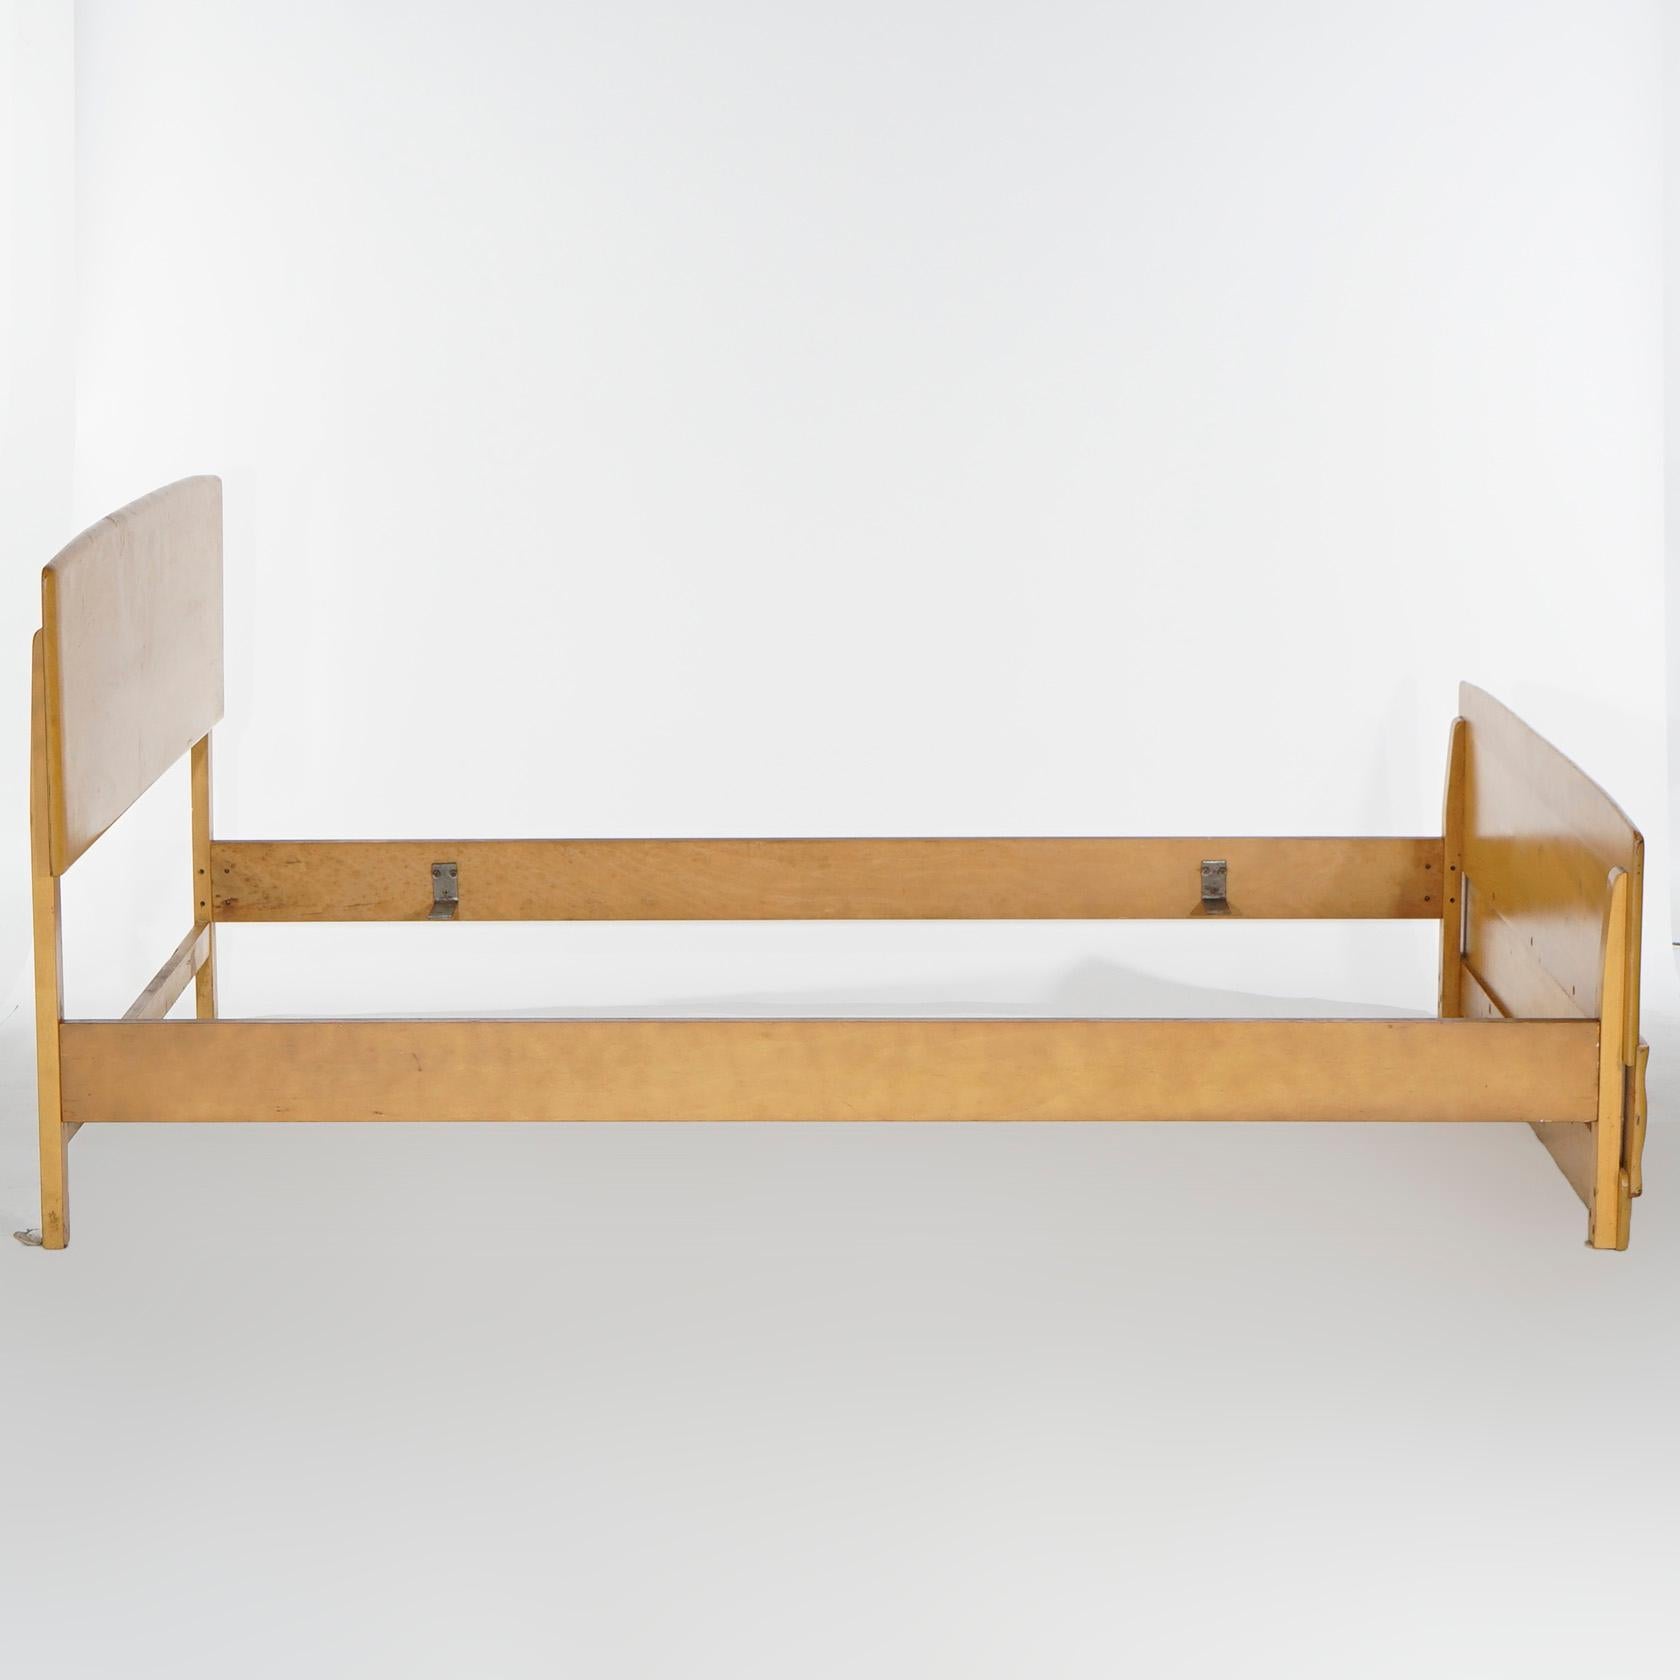 A Mid-Century Modern double bed frame by Heywood Wakefield offers birch construction in Wheat finish, maker mark as photographed, c1950

Measures- Headboard 35''H x 59''W x 2''D; Footboard 59.5''H x 22''W x 2.25''D; Rail to rail 53'' x 75.5''.

*Ask